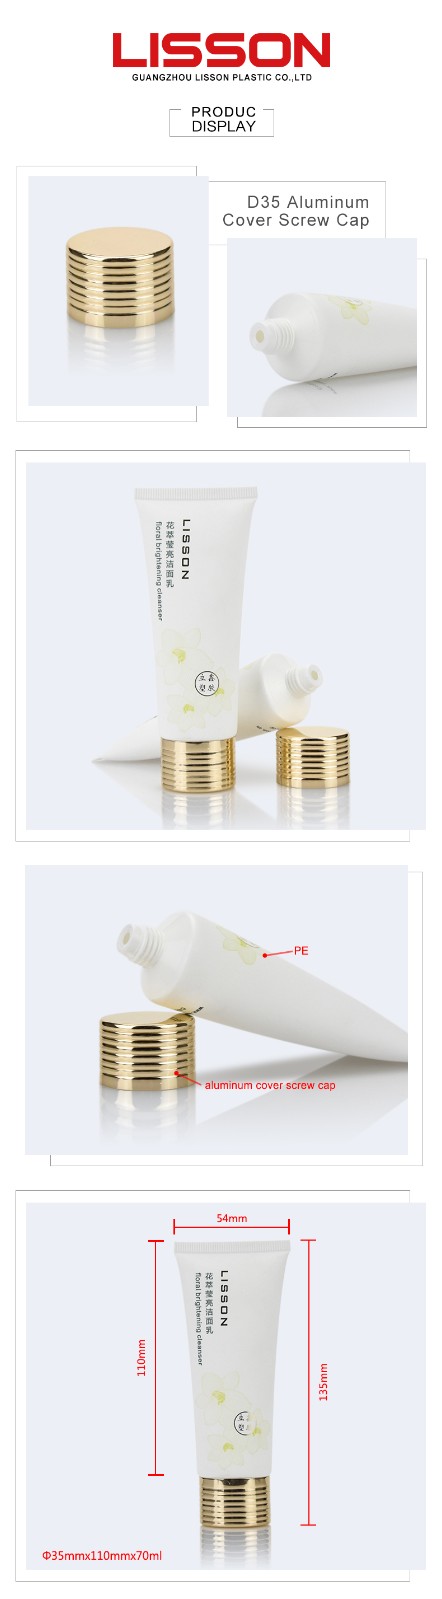 Lisson round lotion tubes high-end for cream